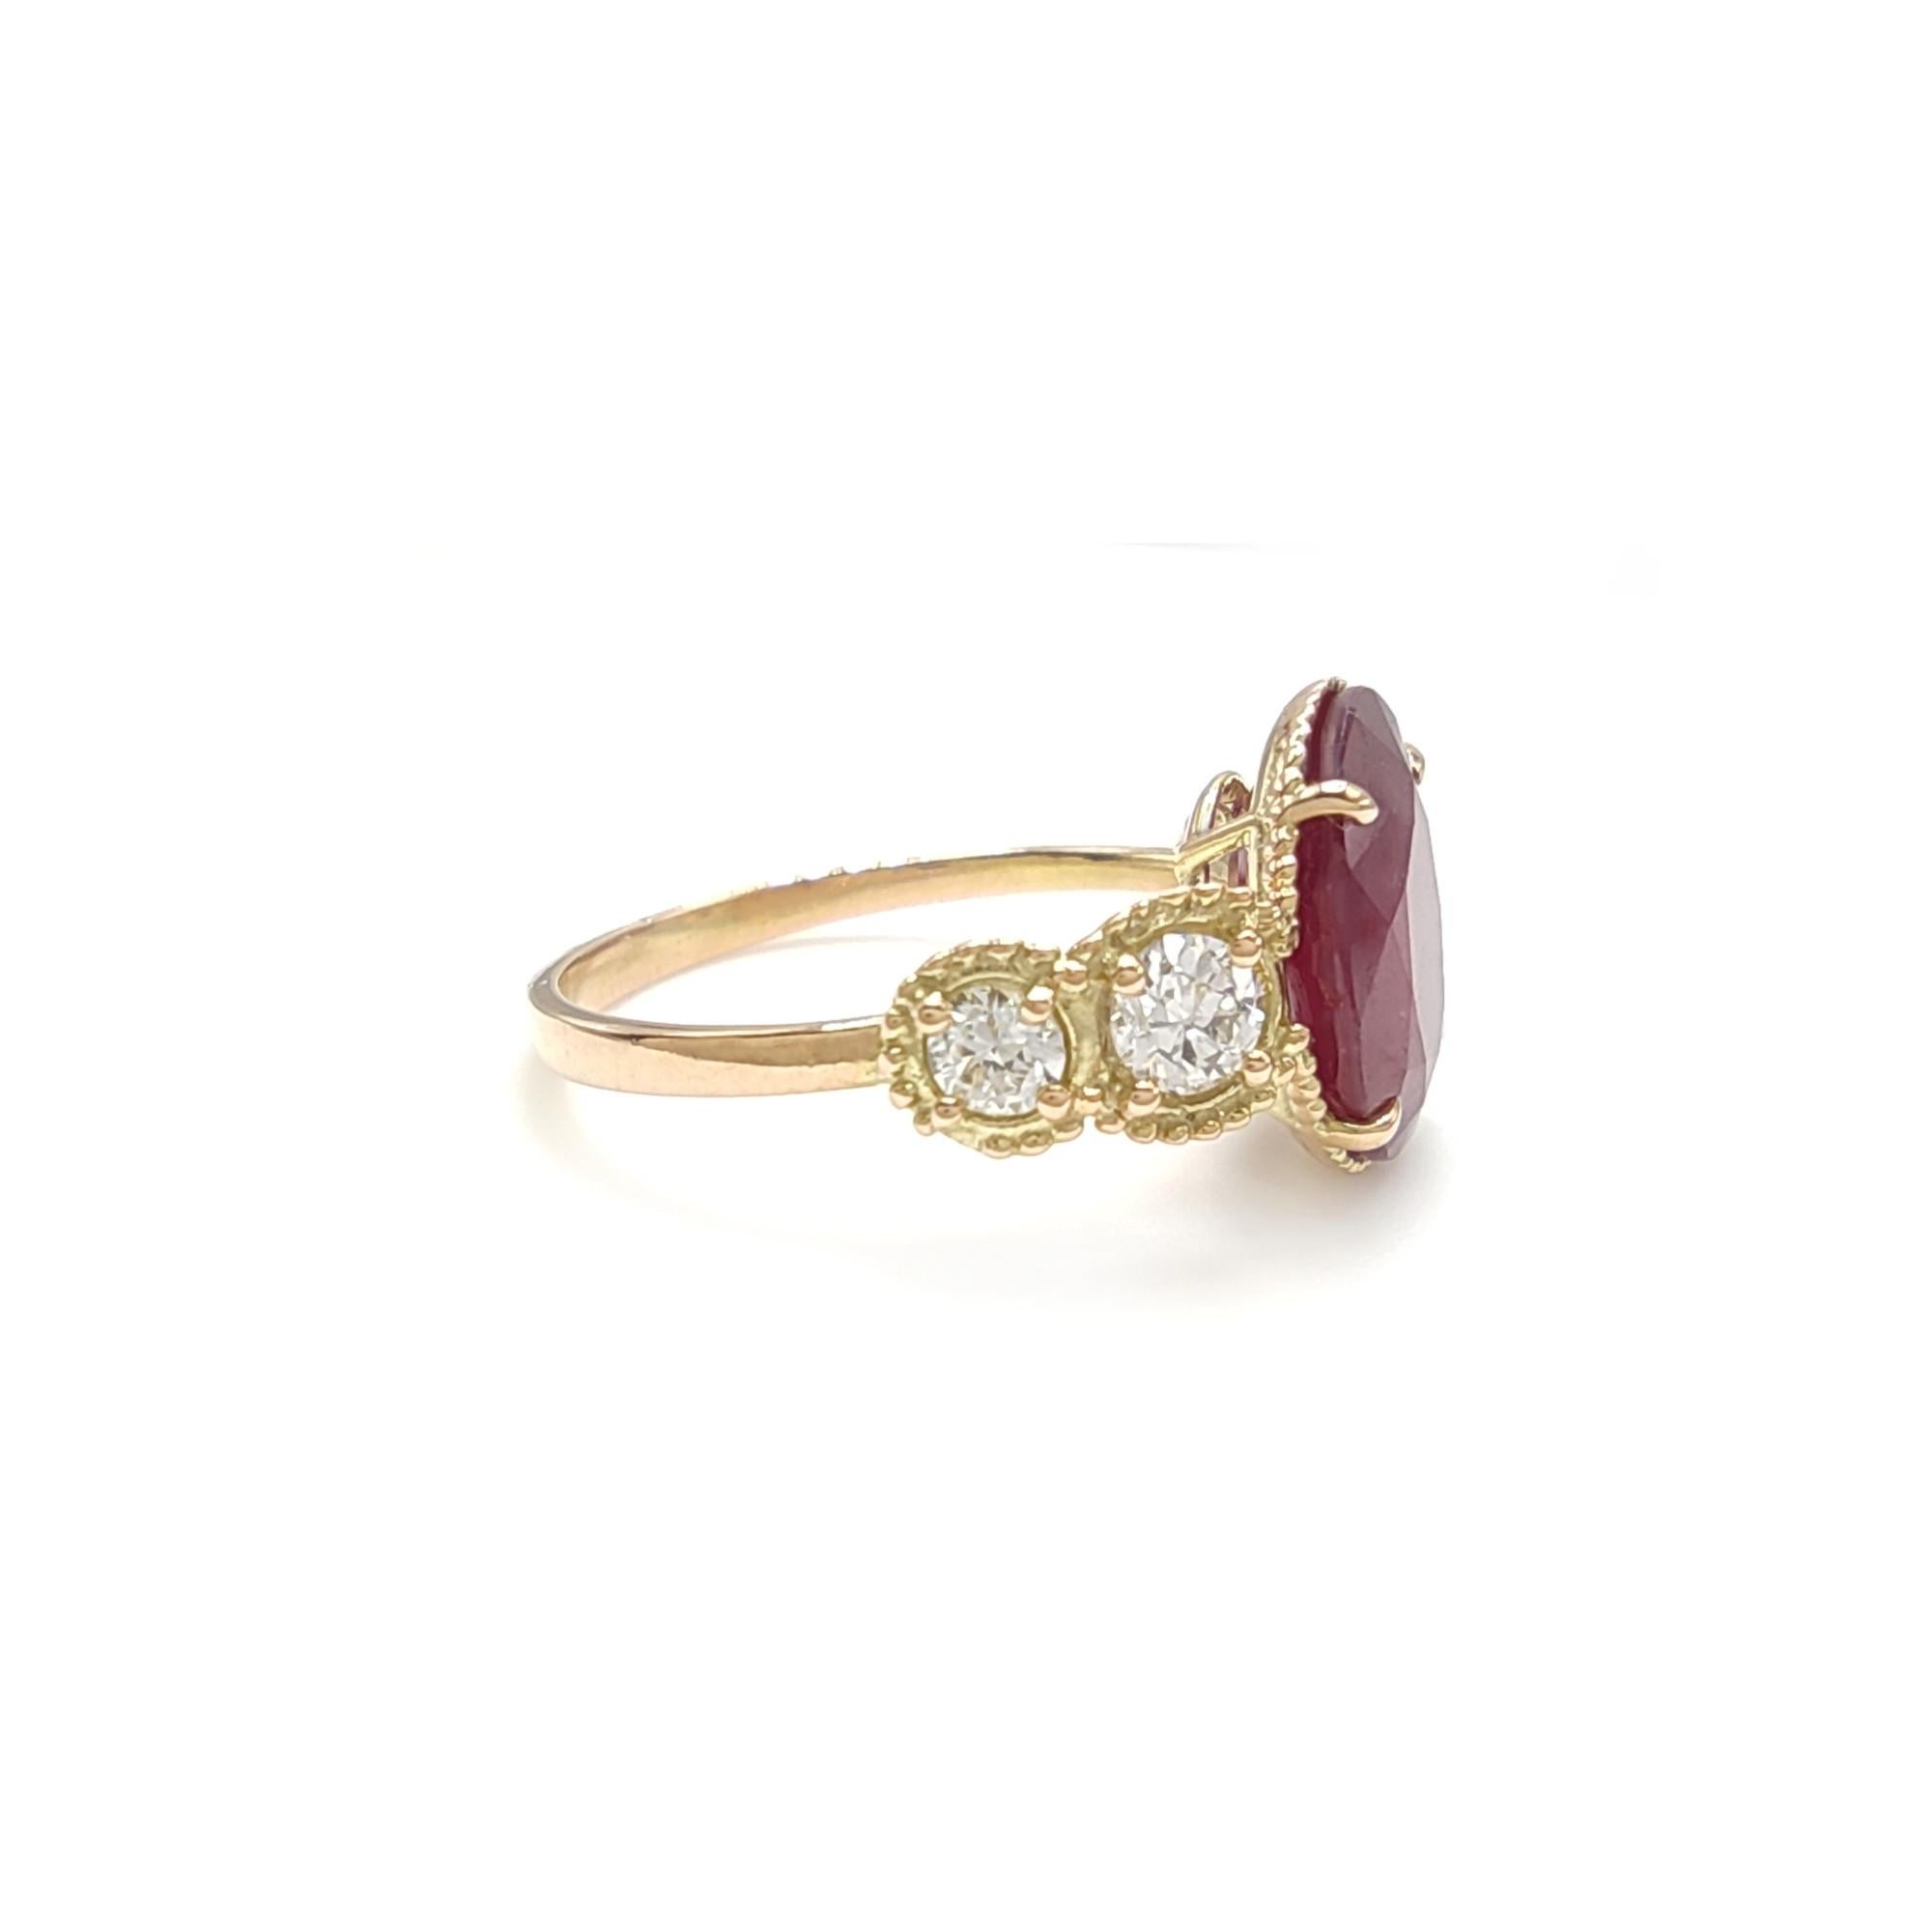 Certified 4.17 carats Ruby Diamond 14K Gold Ring - Contemporary Handmade For Sale 4